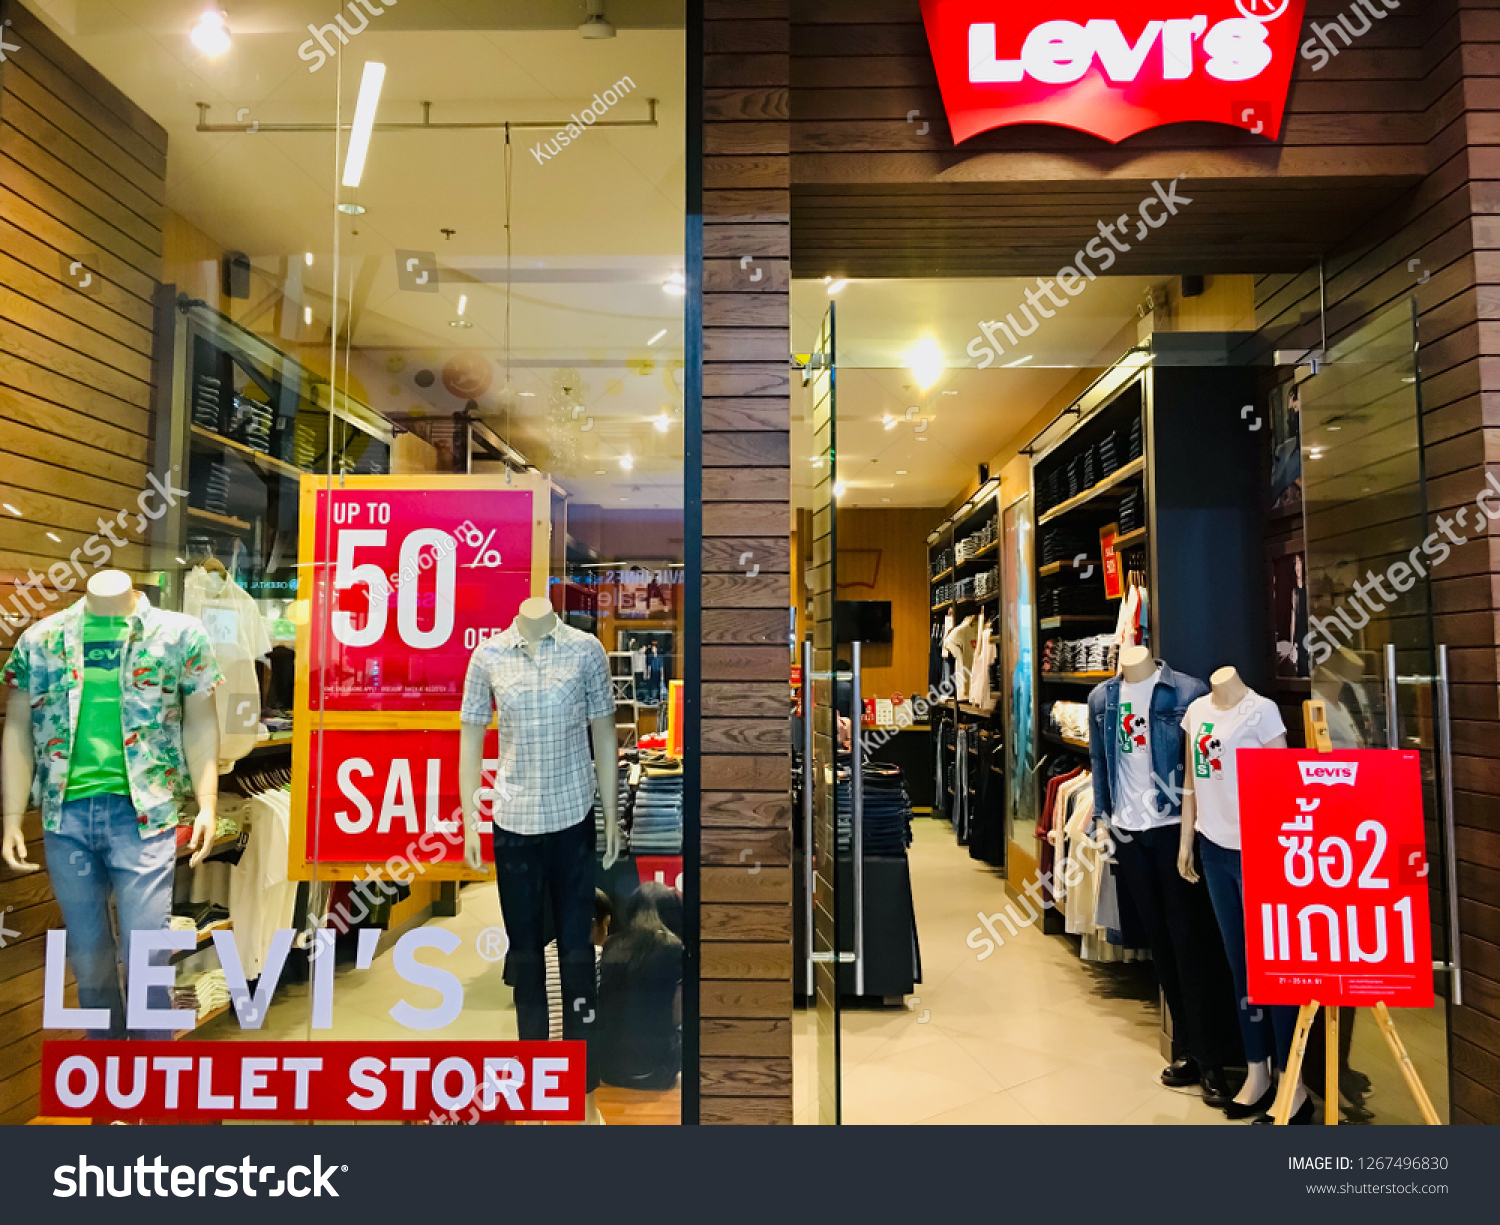 levis in store sale